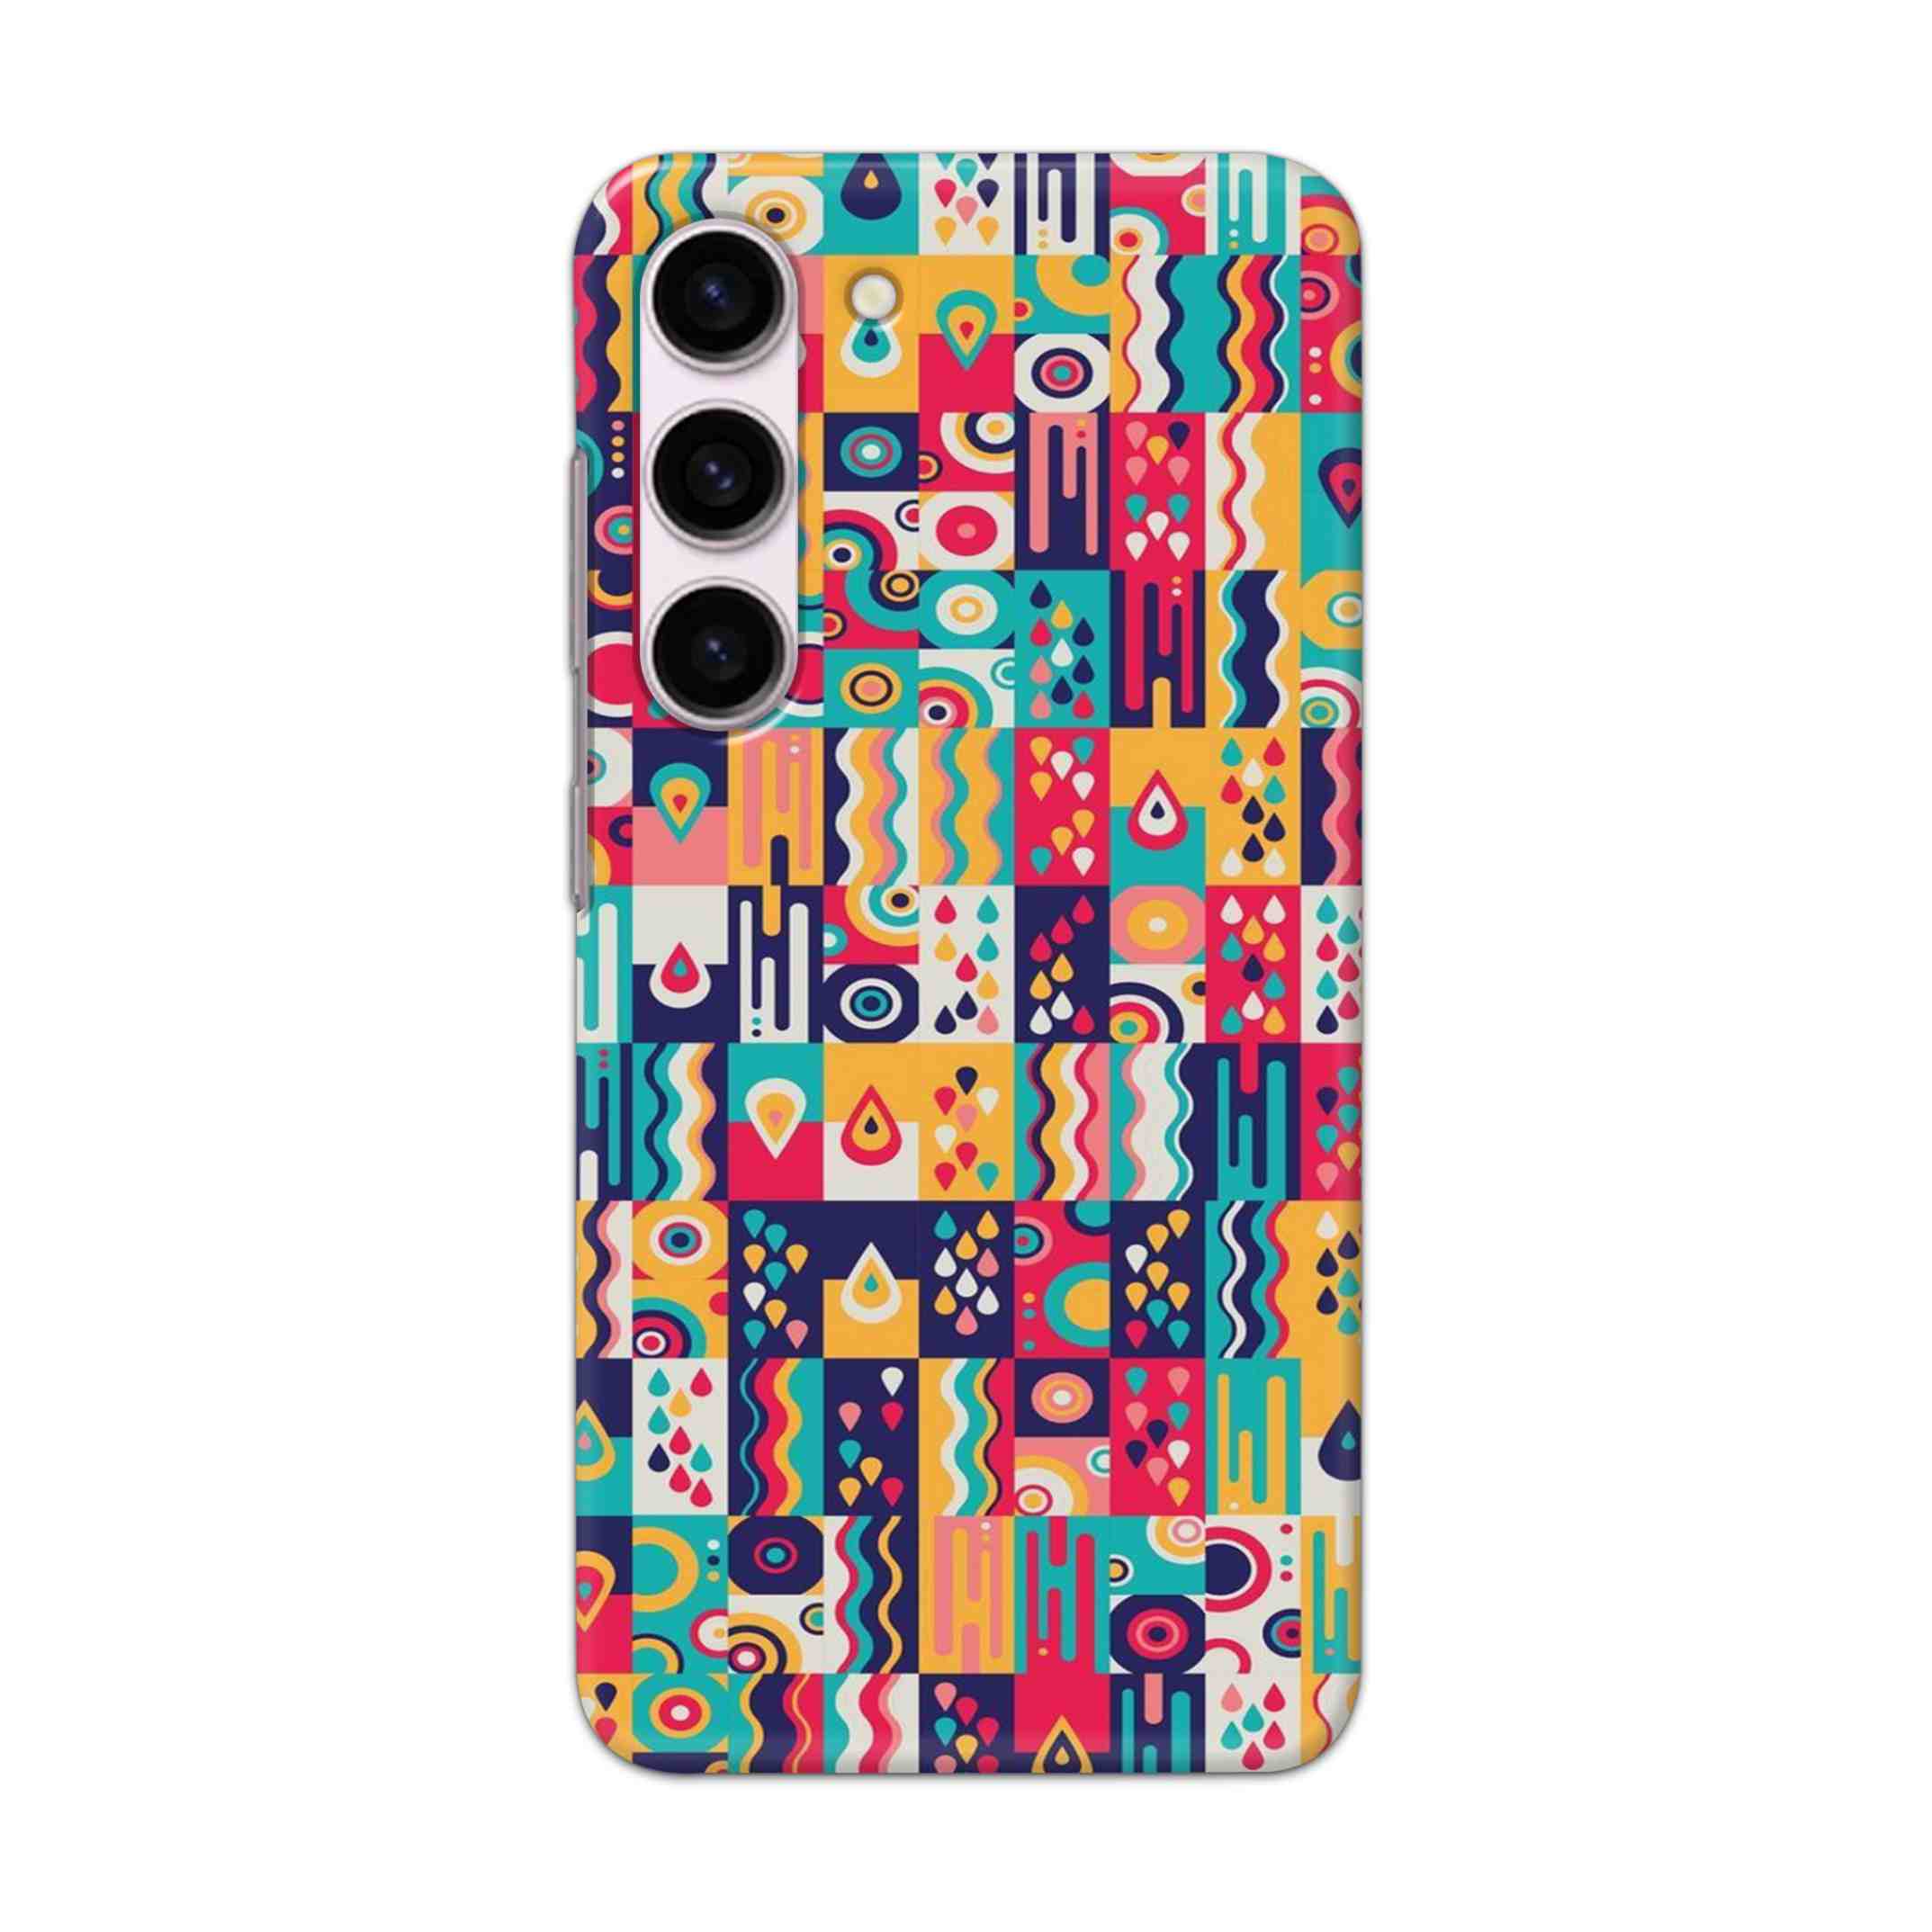 Buy Art Hard Back Mobile Phone Case Cover For Samsung Galaxy S23 Online